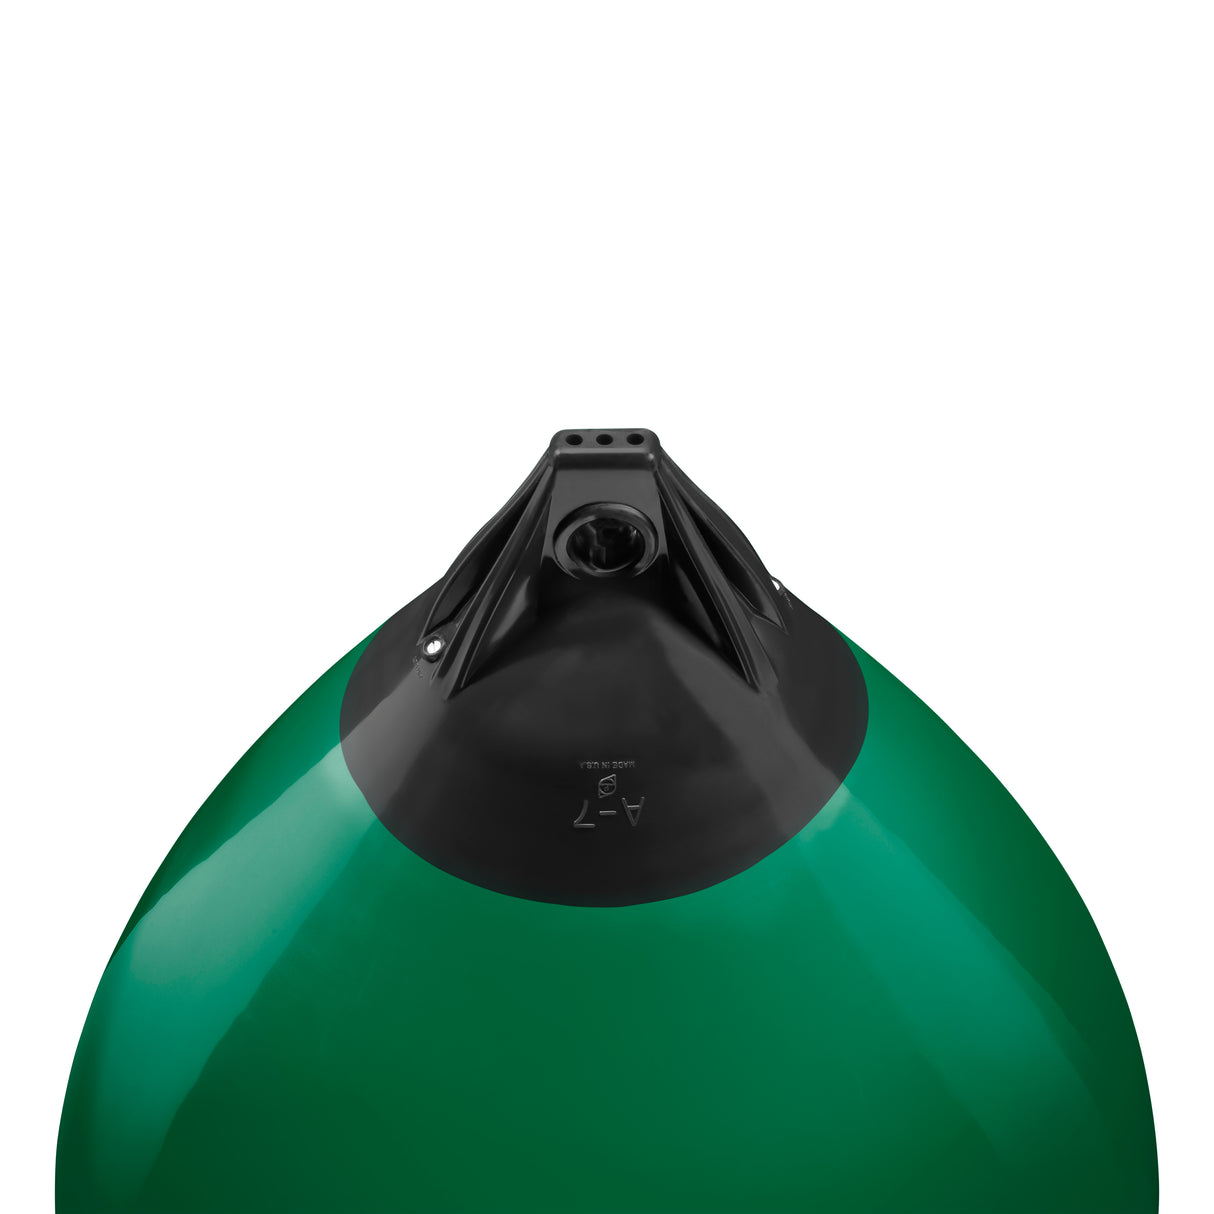 Forest Green buoy with Black-Top, Polyform A-7 angled shot